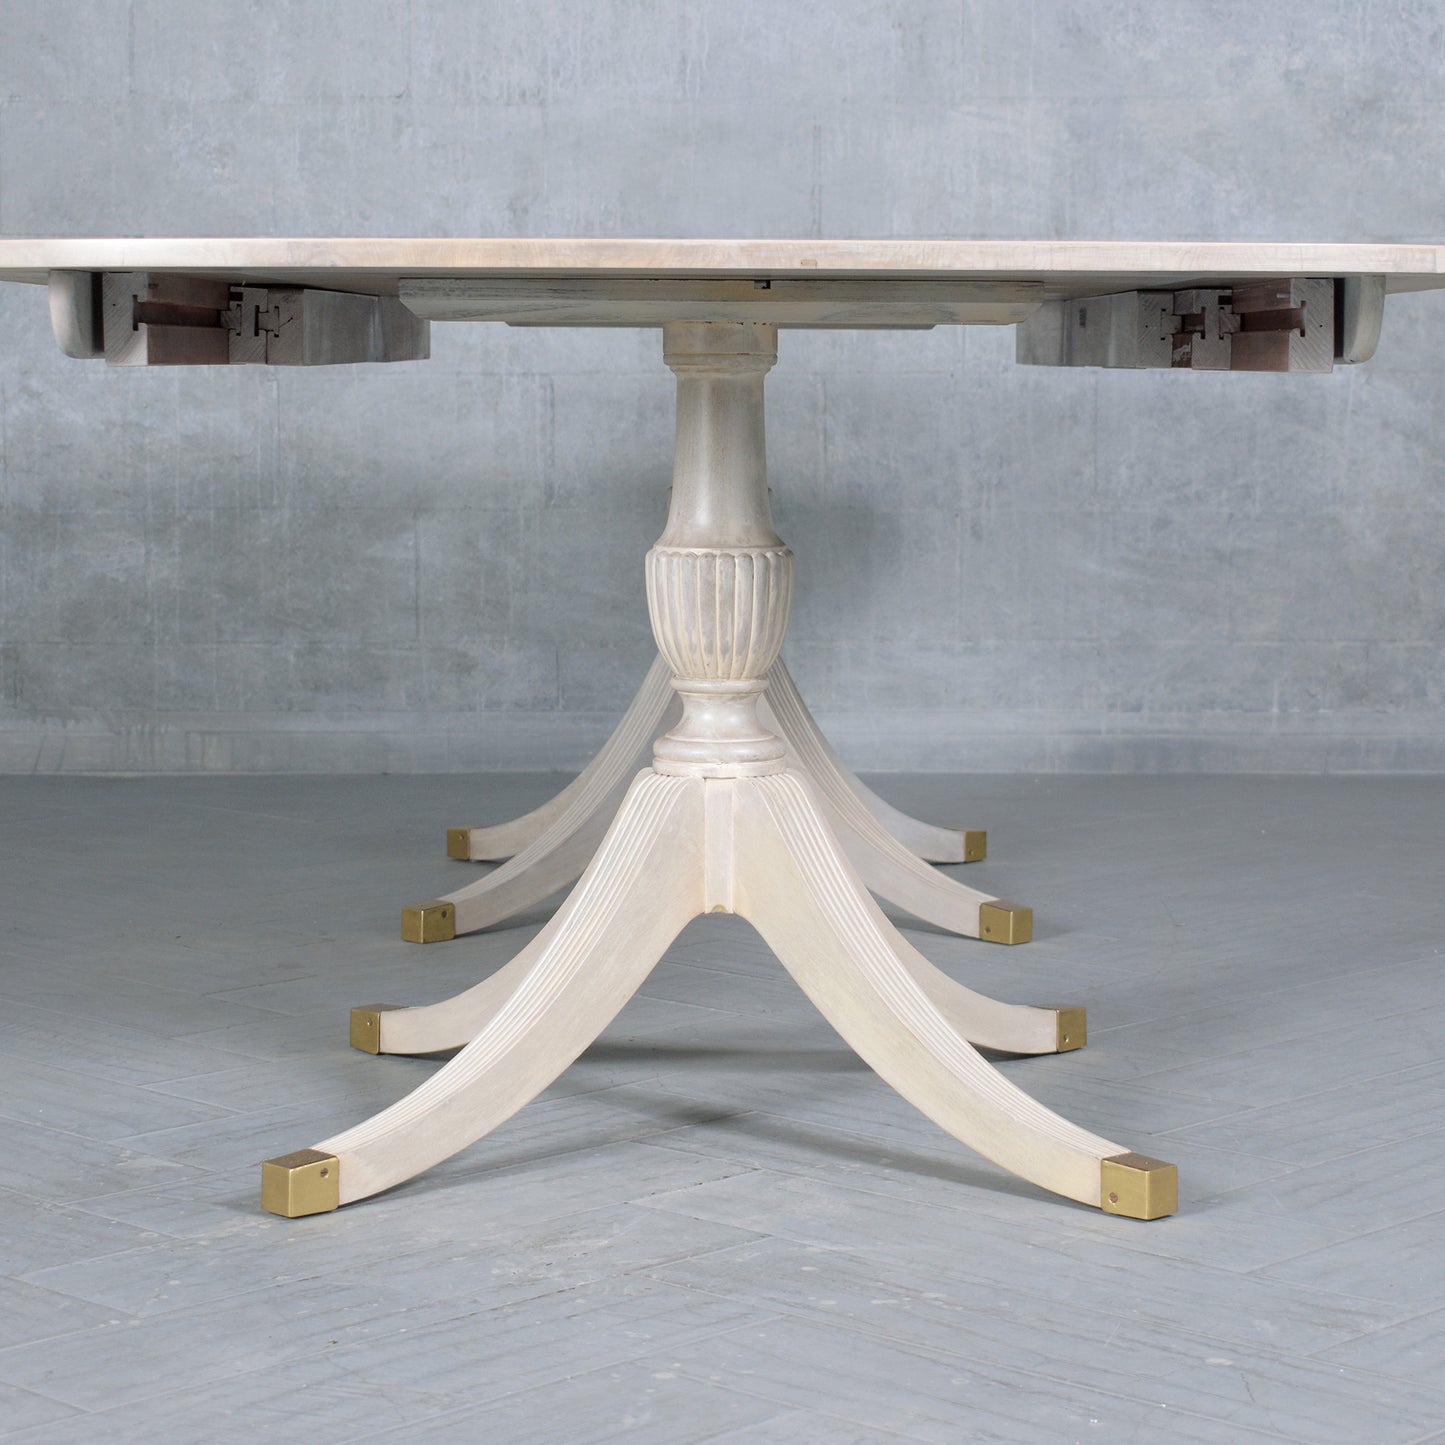 Restored Vintage George III Style Extendable Dining Table